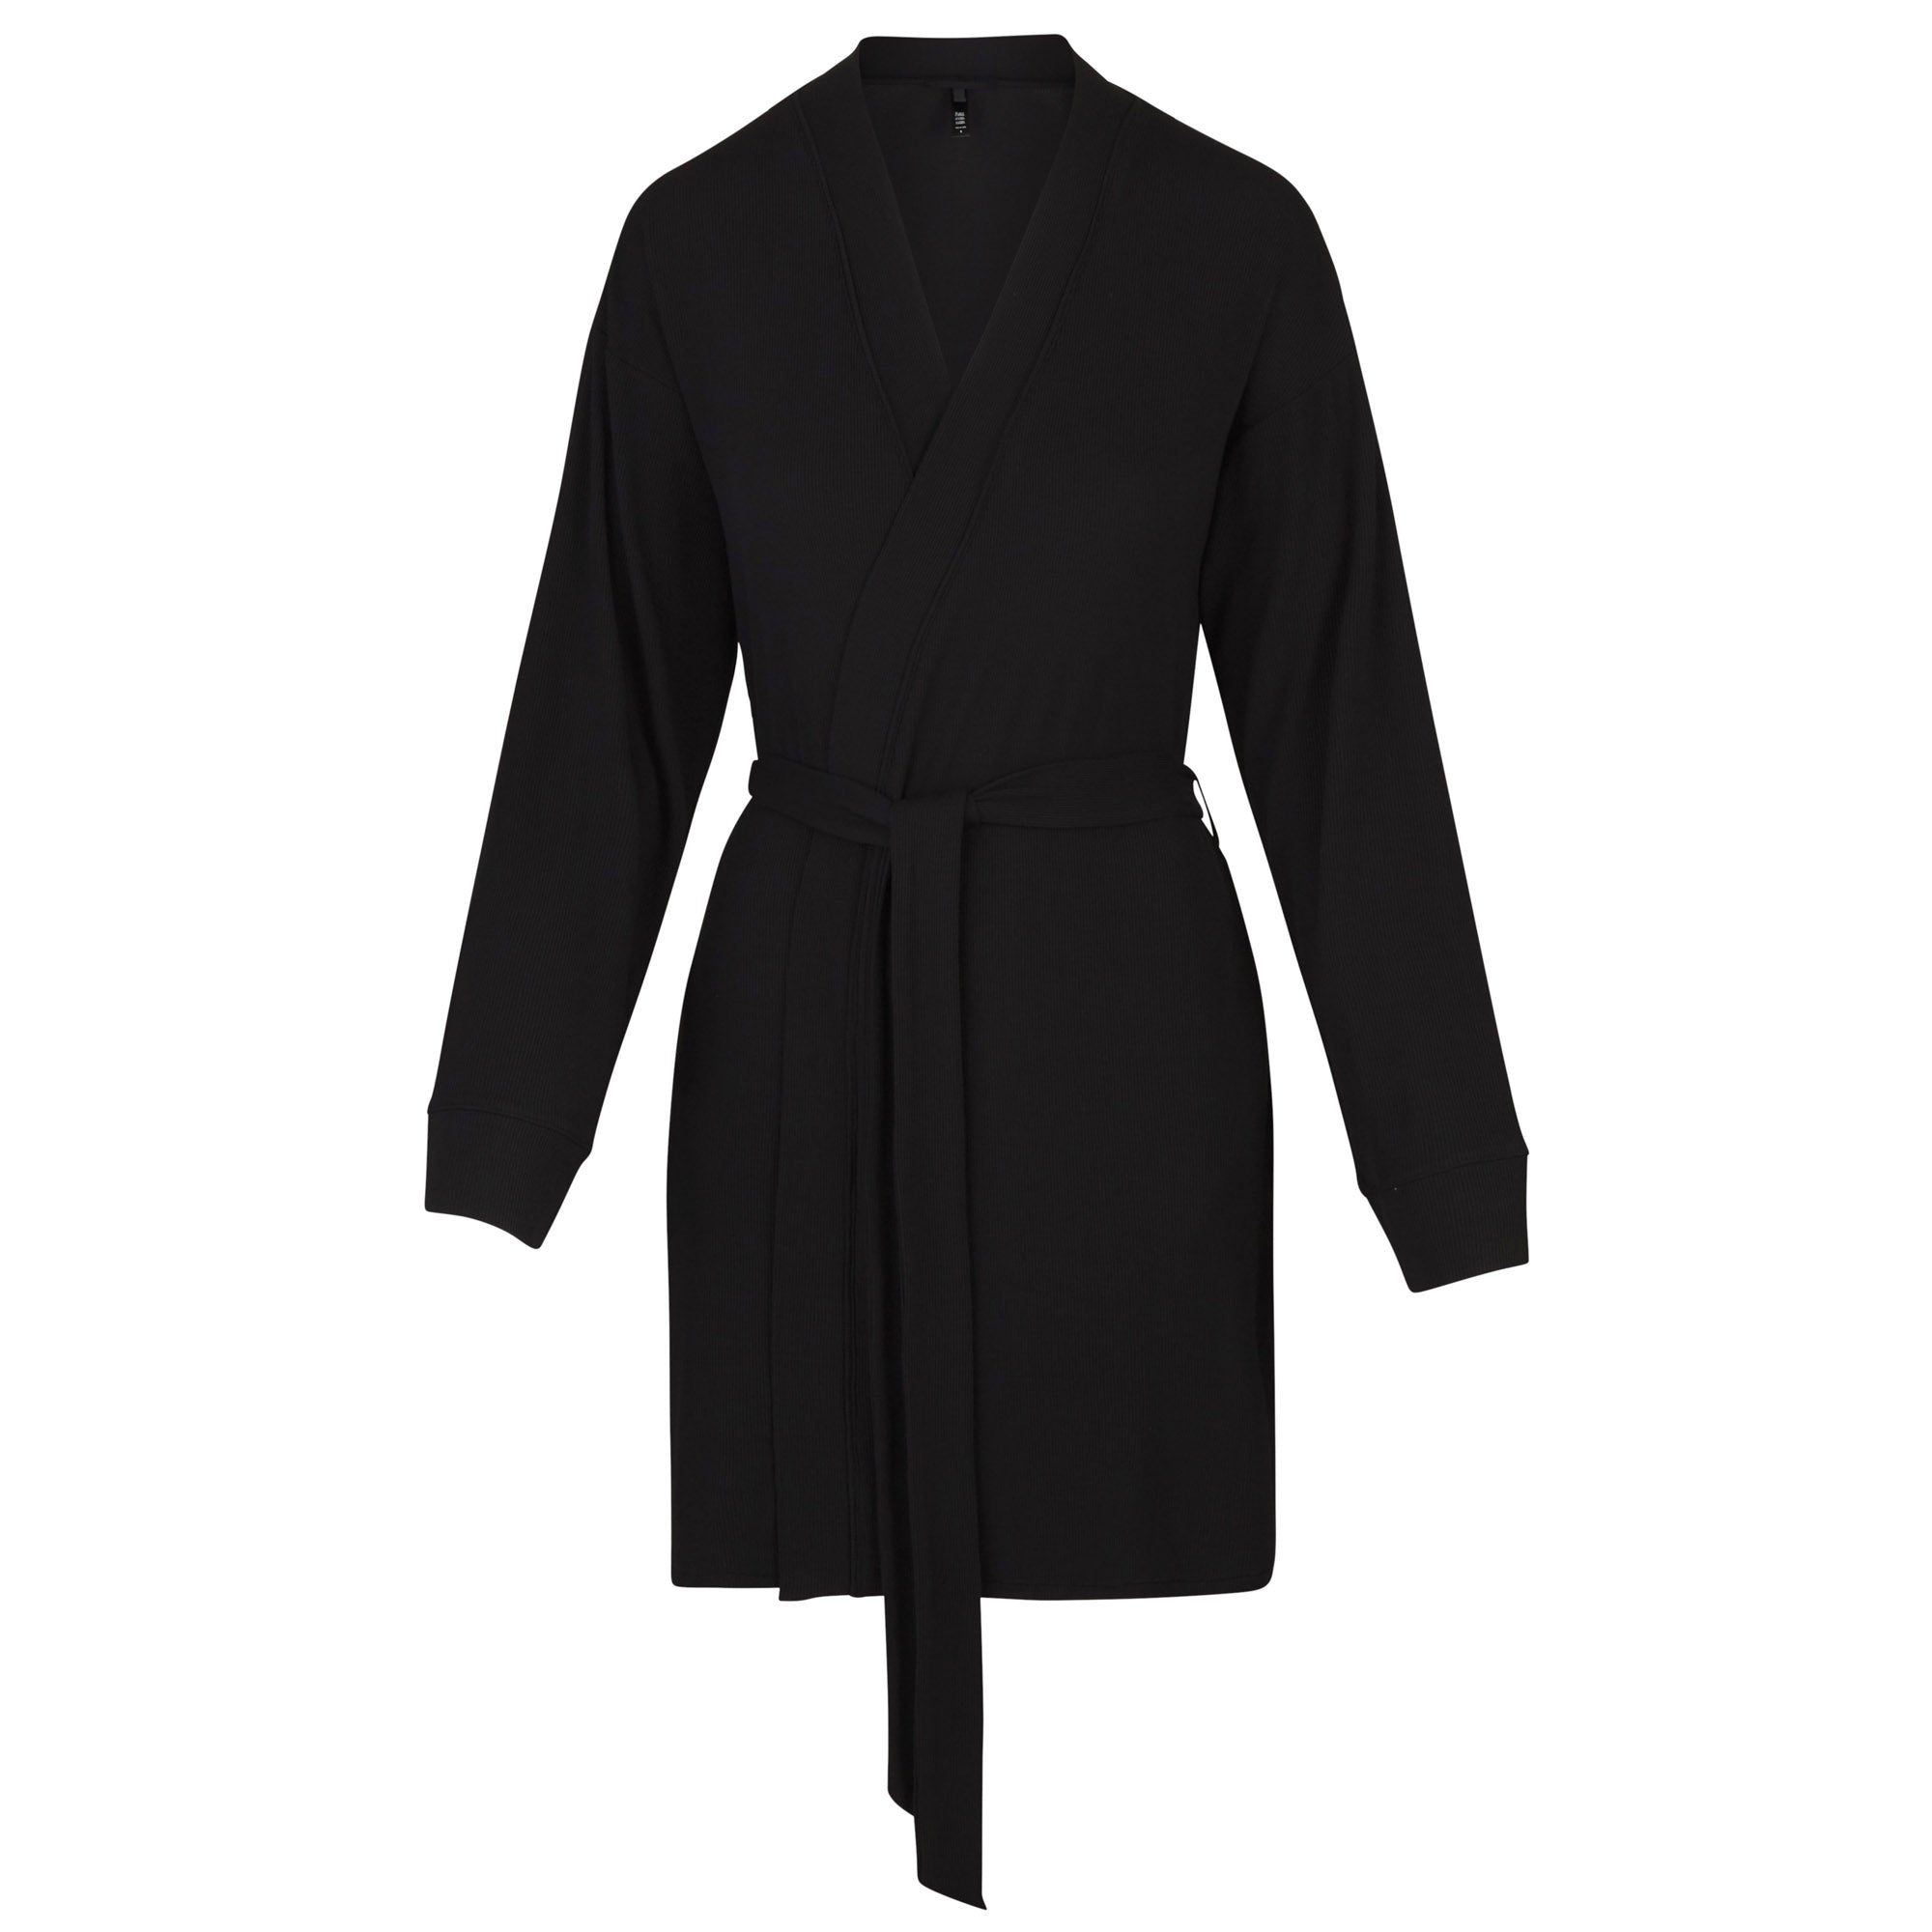 SKIMS - The Ultimate Luxury Piece: SKIMS Velour Robe - available now in 4  colors and in sizes XXS - 4X. Shop Velour